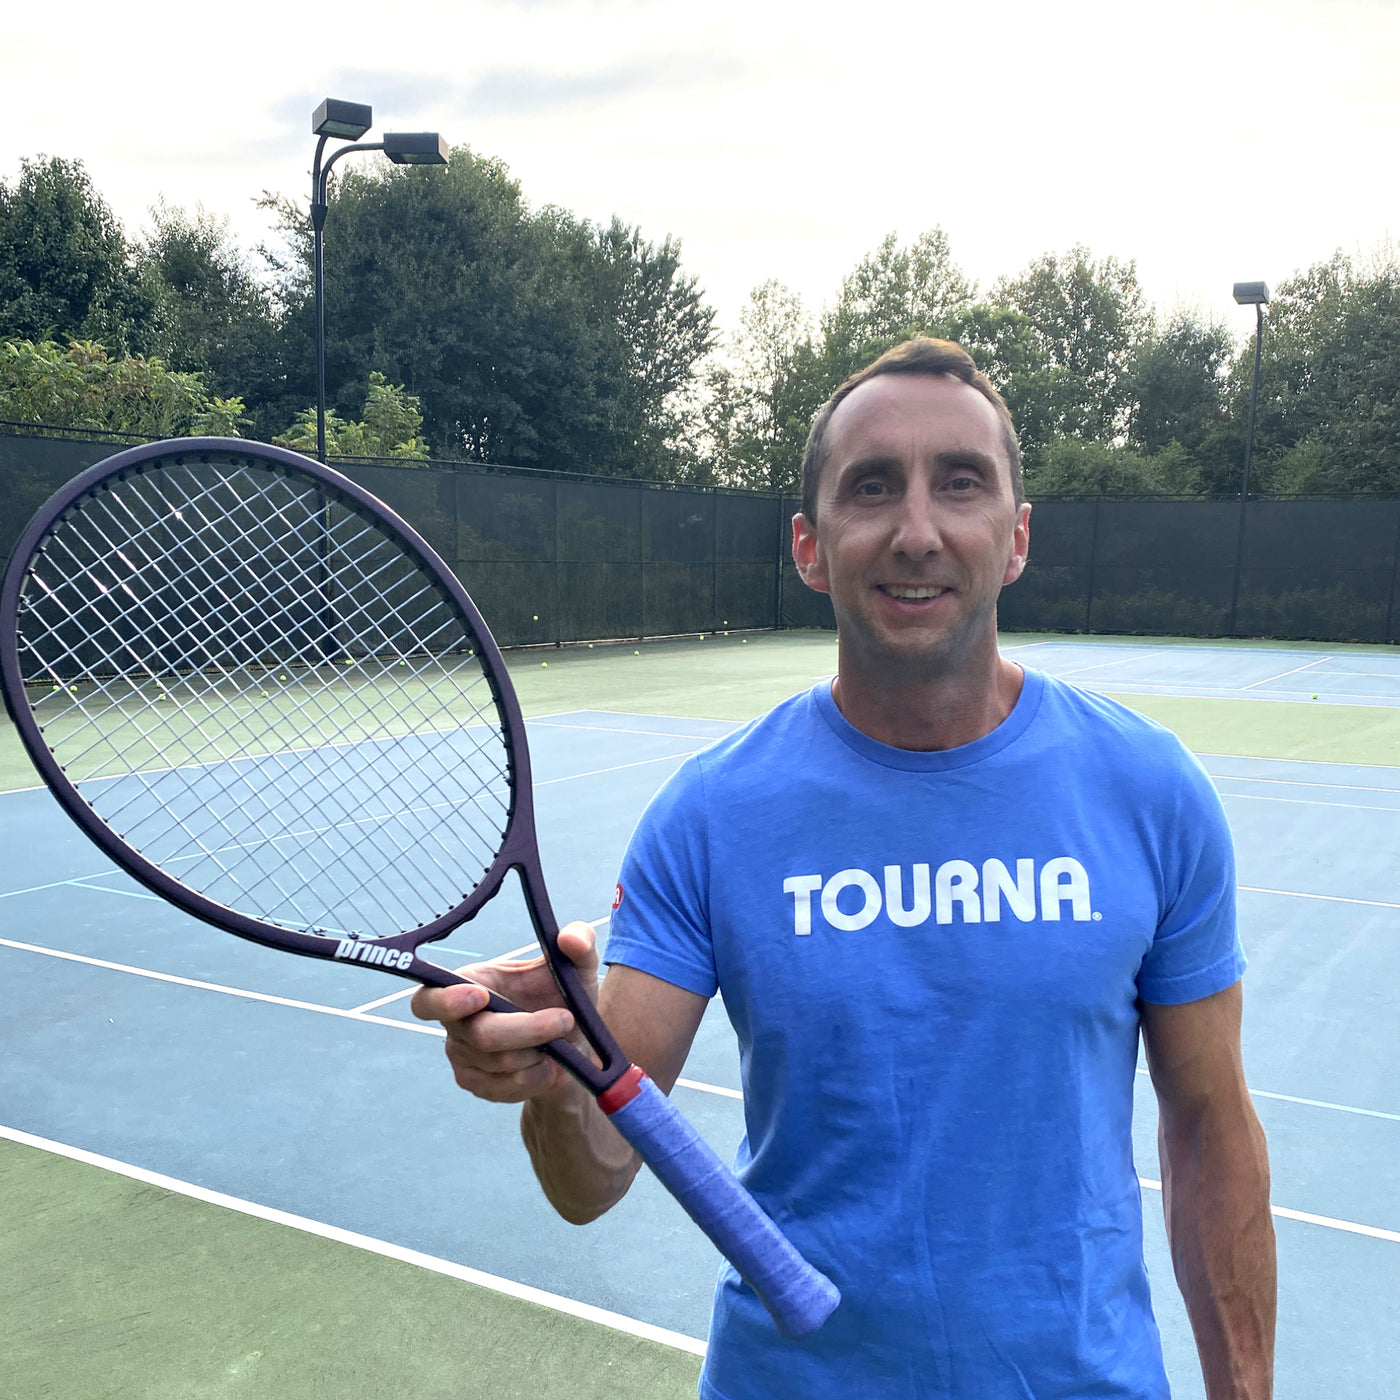 Kevin Niksich - The Tourna Story